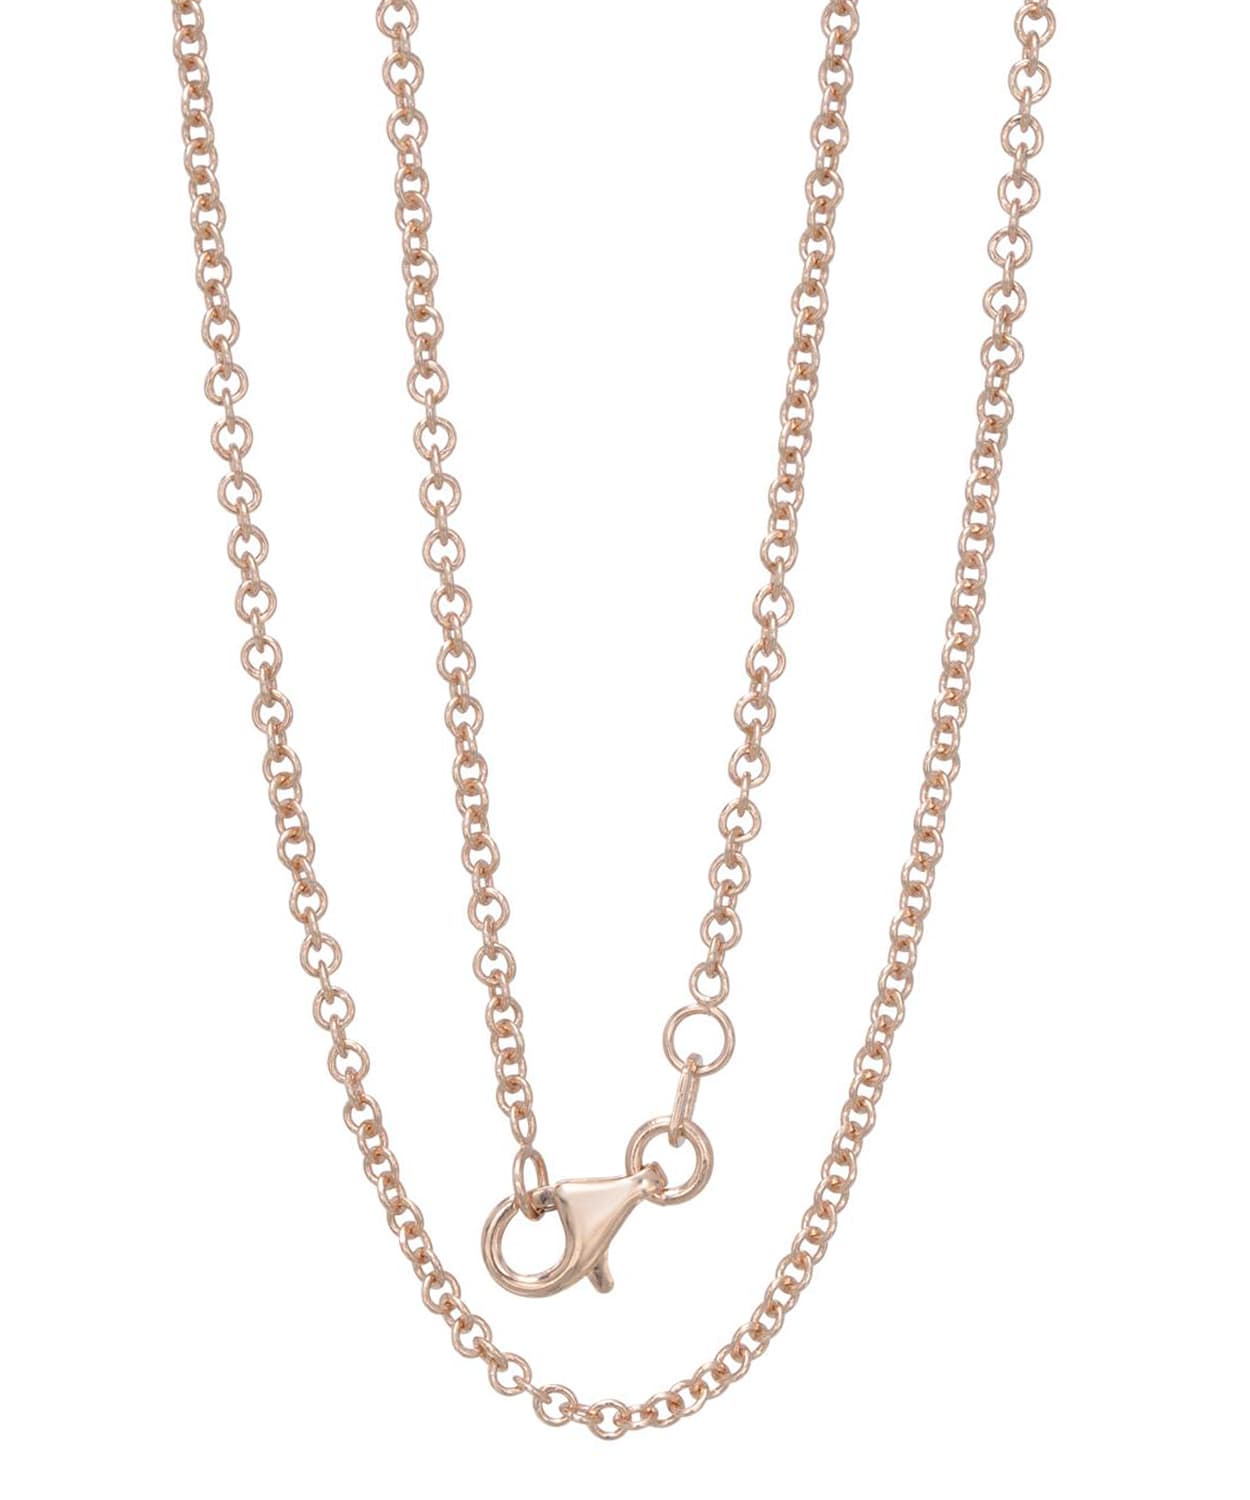 ESEMCO 1.8mm 14K Rose Gold Rolo Chain View 2